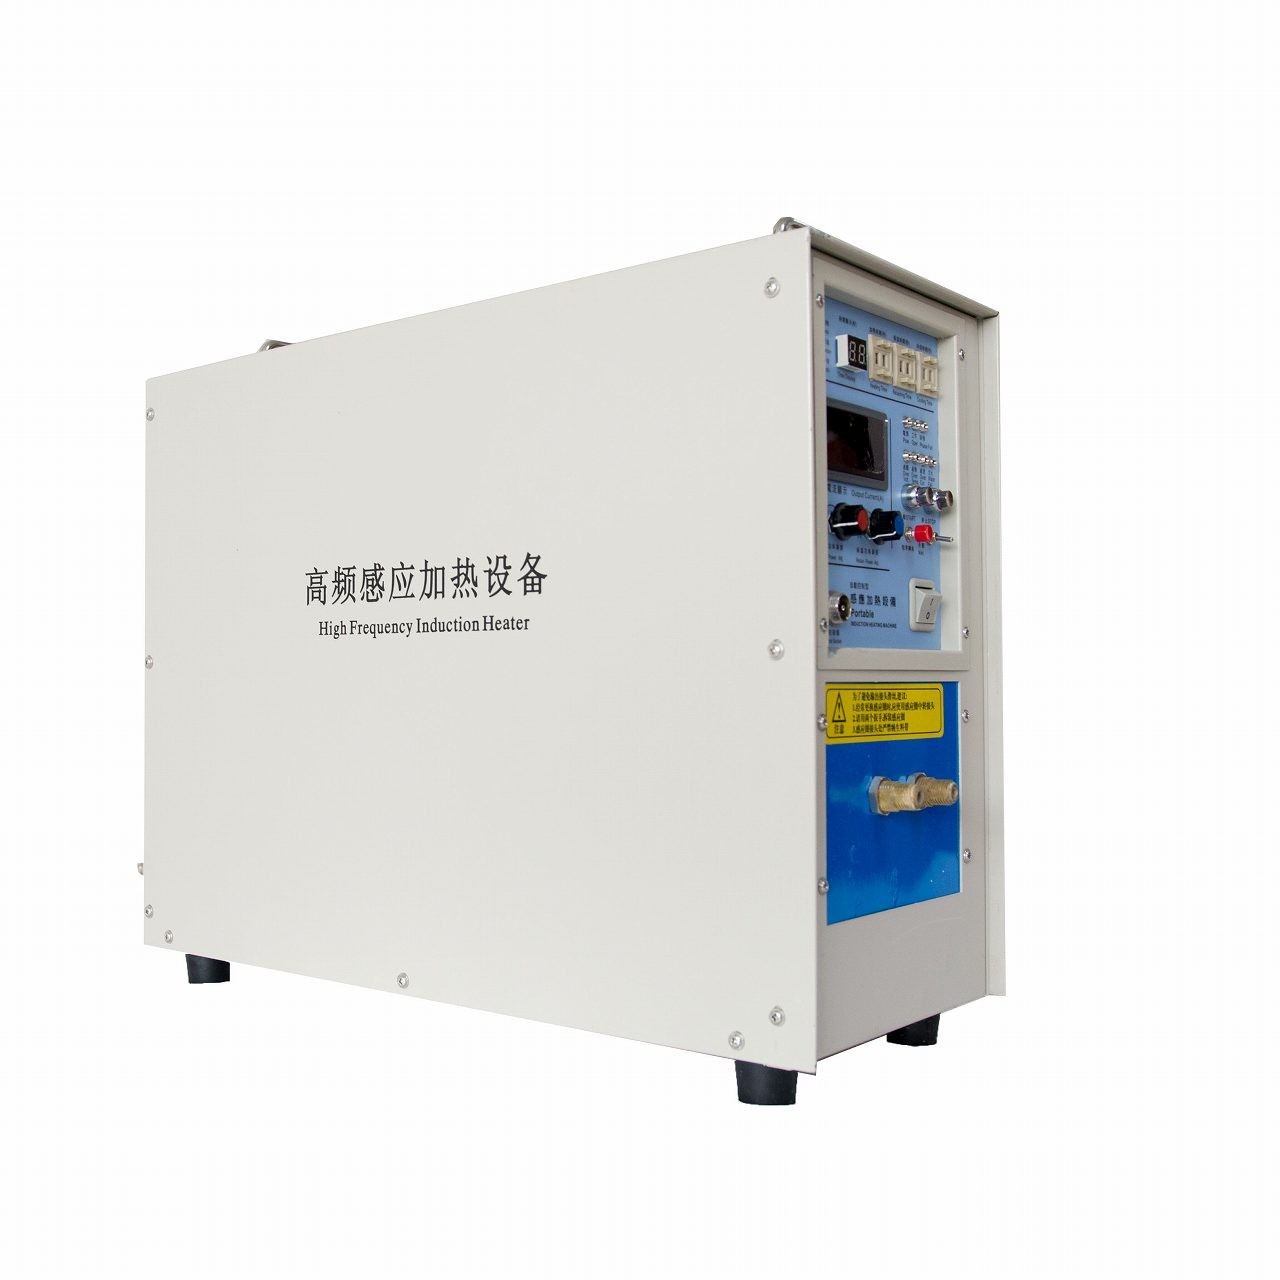 35kw High Frequency Induction Heater DDFT-35